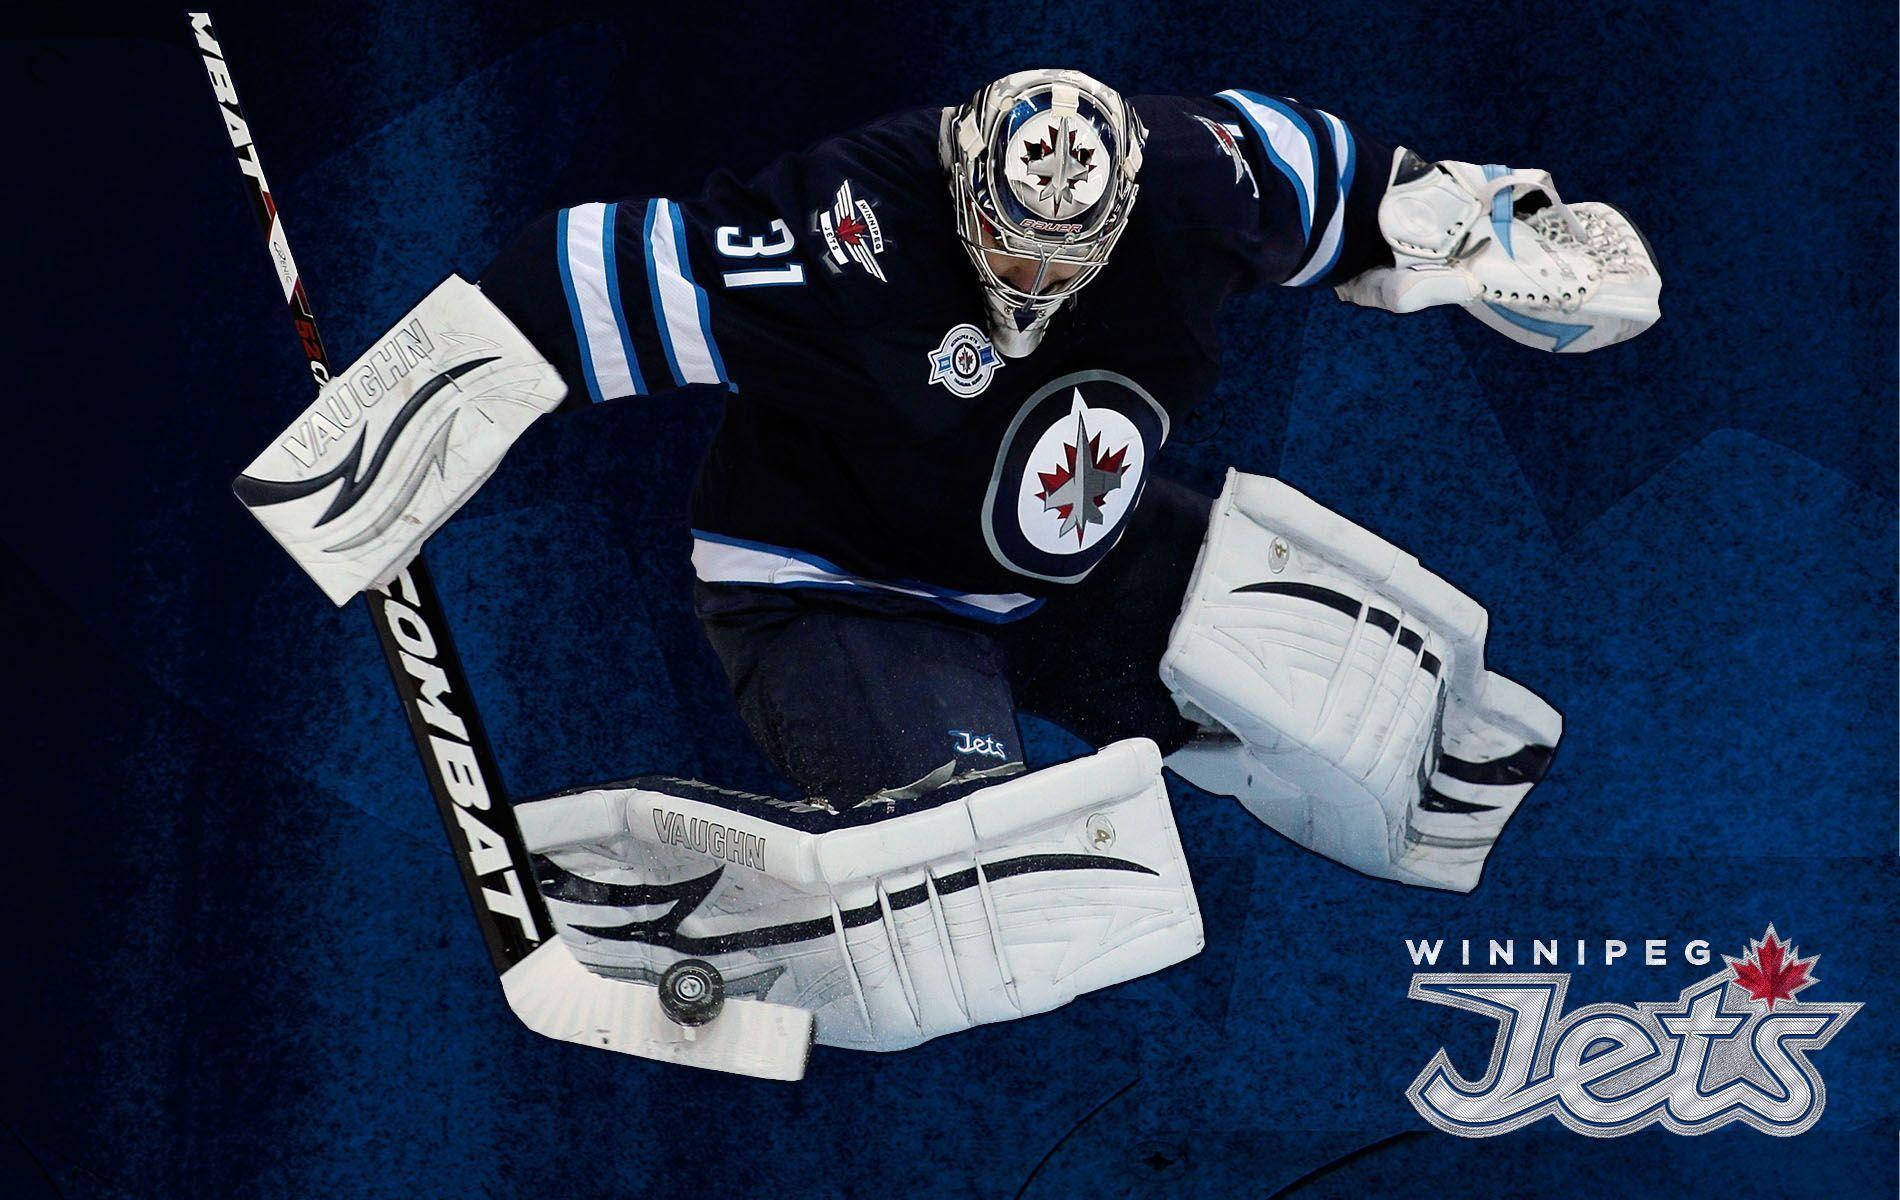 Intense Game Moment With Winnipeg Jets Player Background